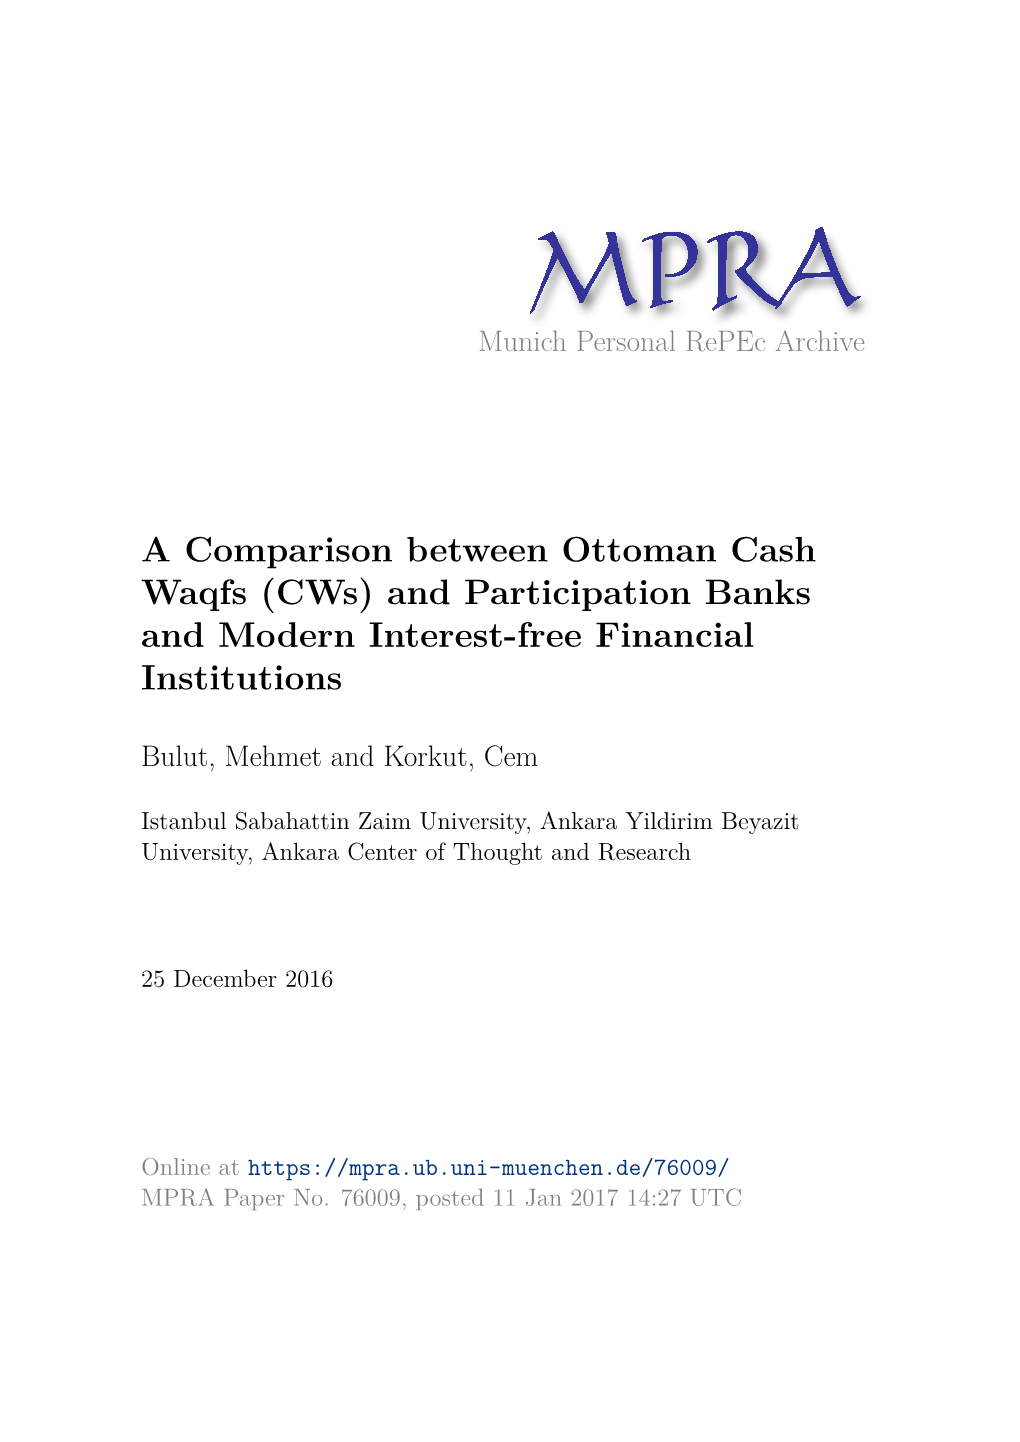 A Comparison Between Ottoman Cash Waqfs (Cws) and Participation Banks and Modern Interest-Free Financial Institutions